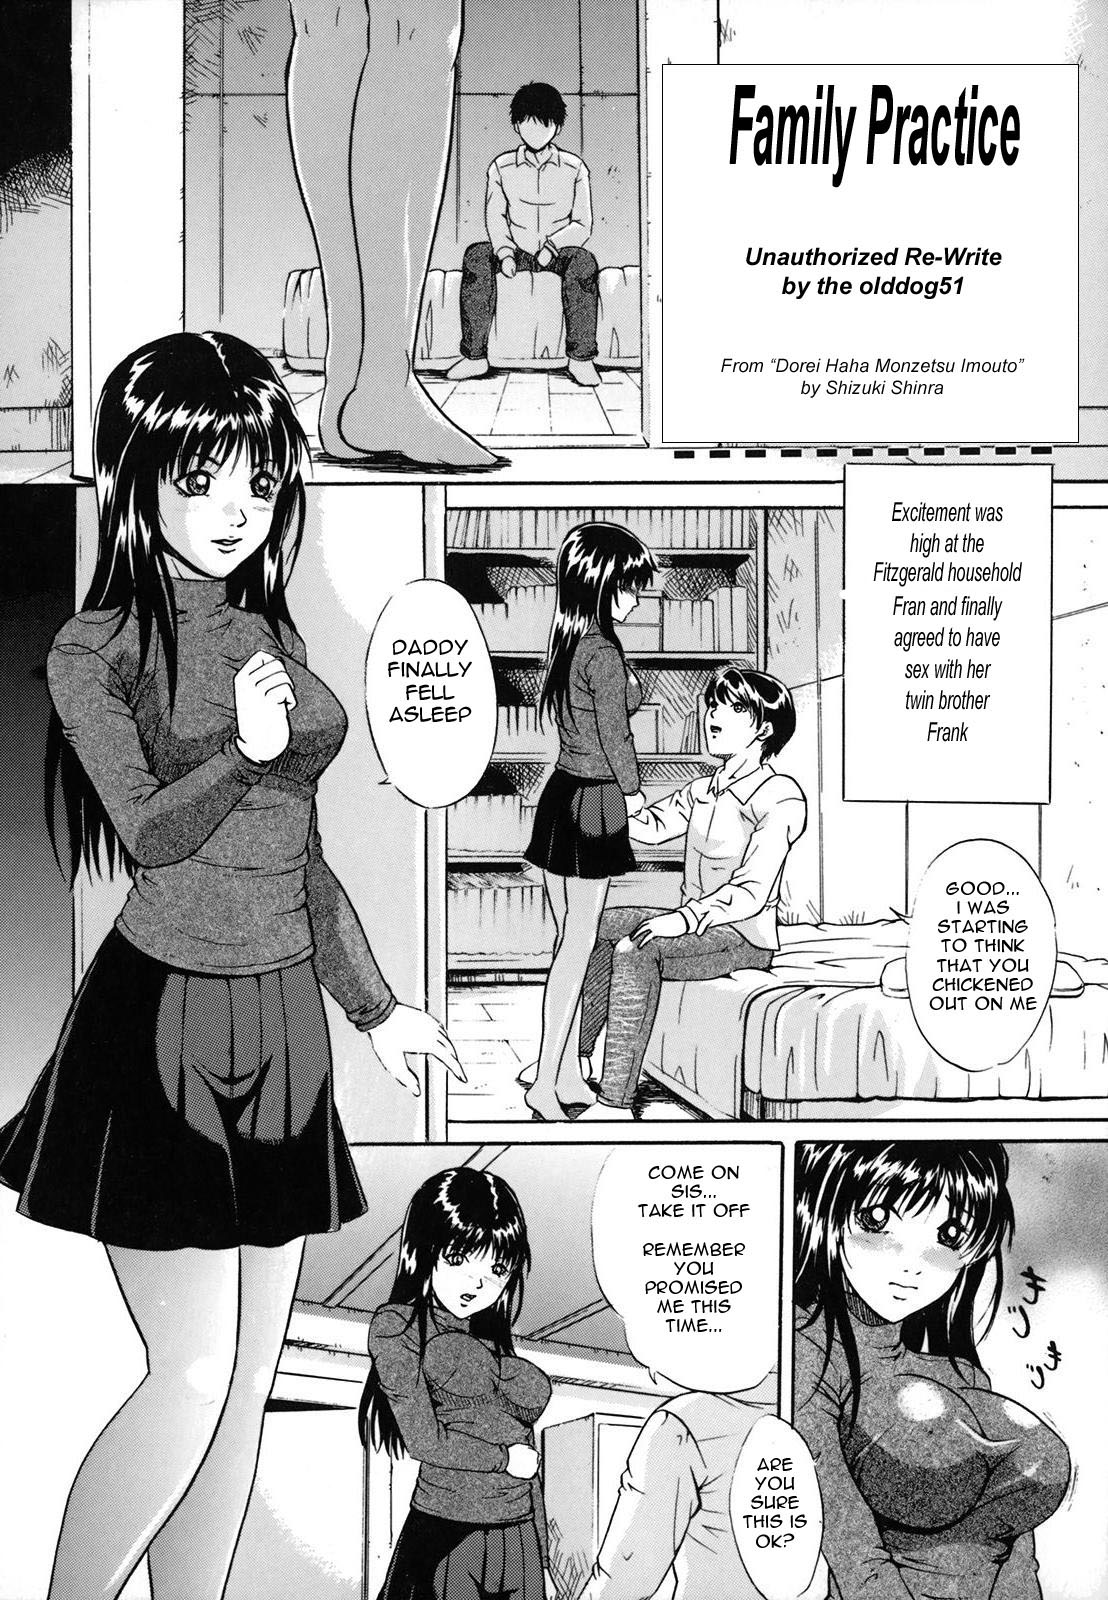 Family Practice [English] [Rewrite] [olddog51] page 1 full